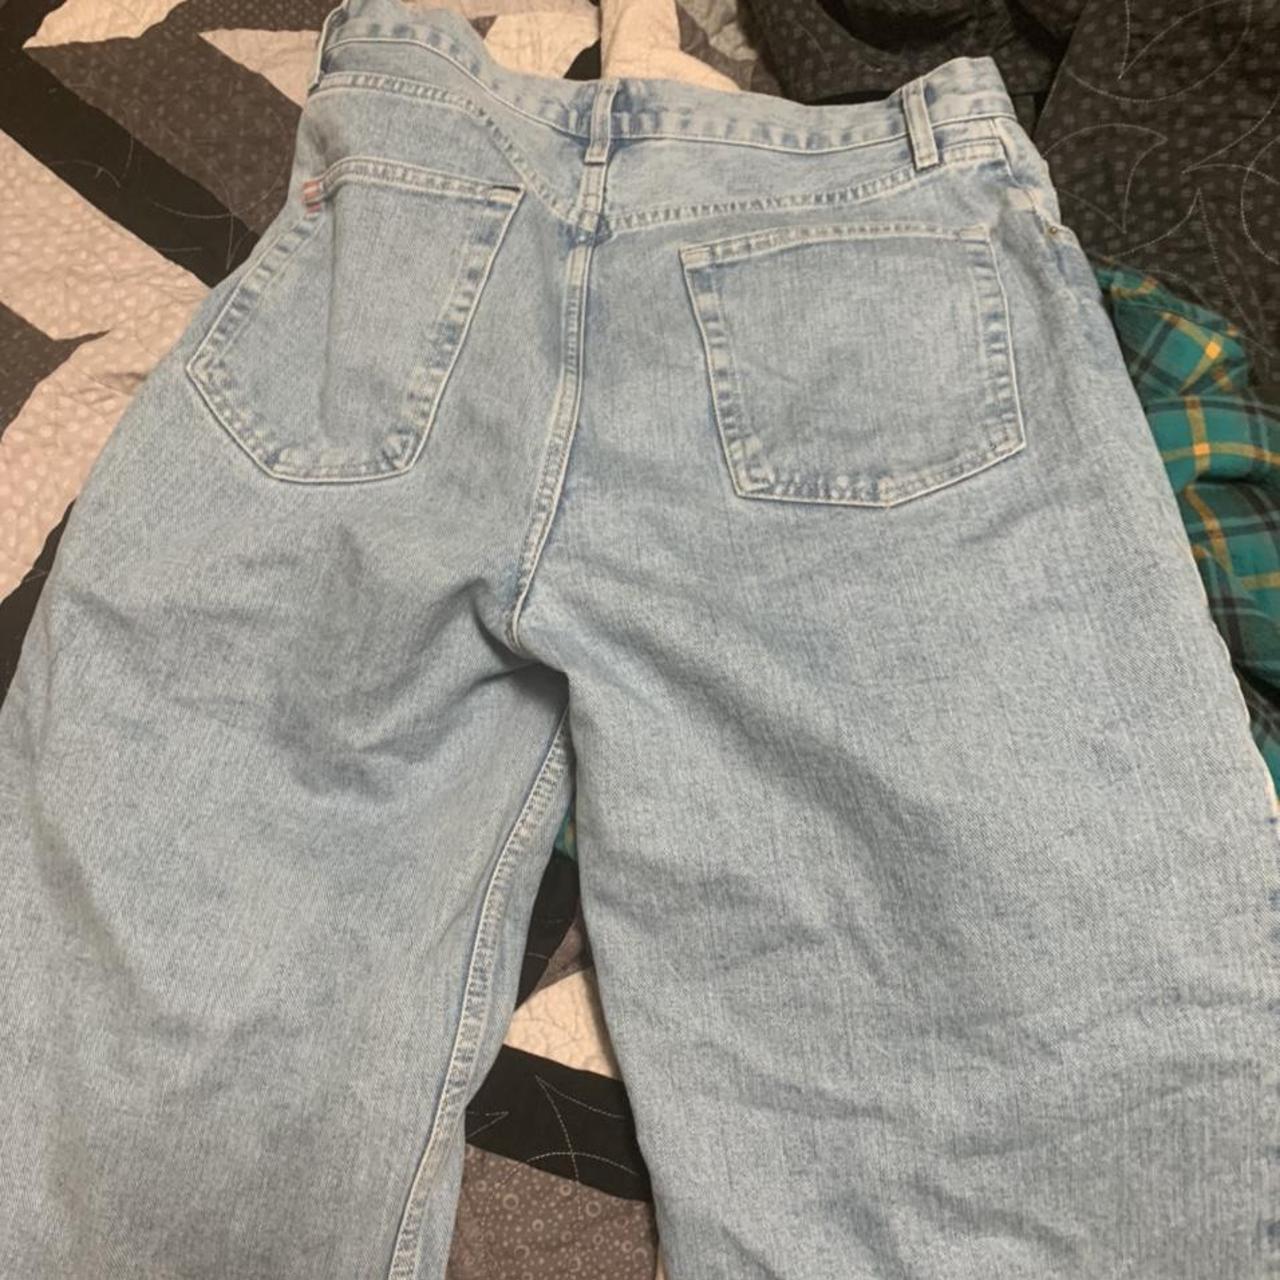 High Rise baggy BDG urban outfitters jeans worn... - Depop